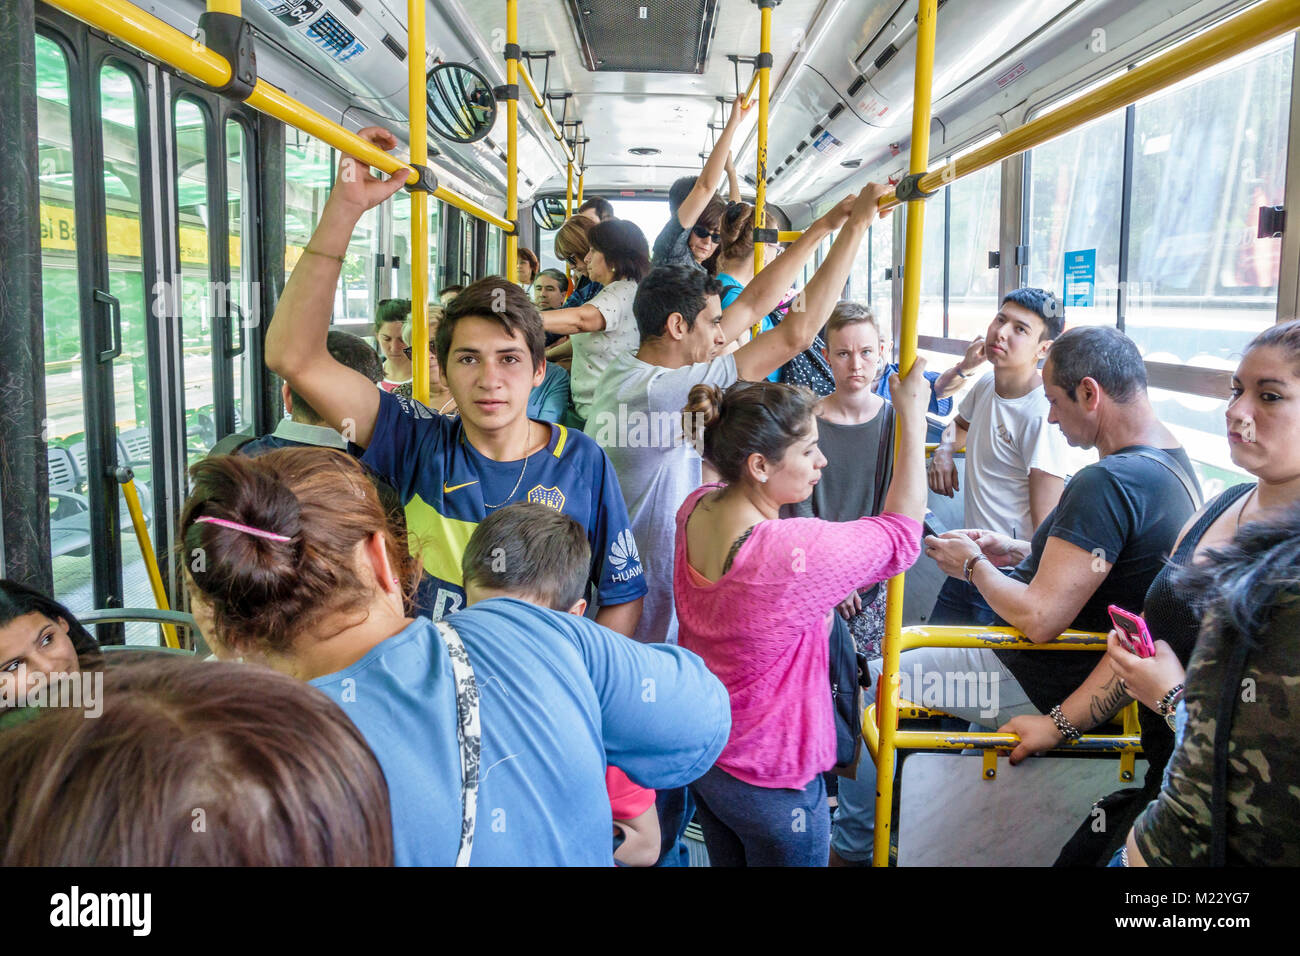 Buenos Aires Argentina,bus,passenger passengers rider riders,crowded,standing,man men male,woman female women,Hispanic,Argentinean Argentinian Argenti Stock Photo